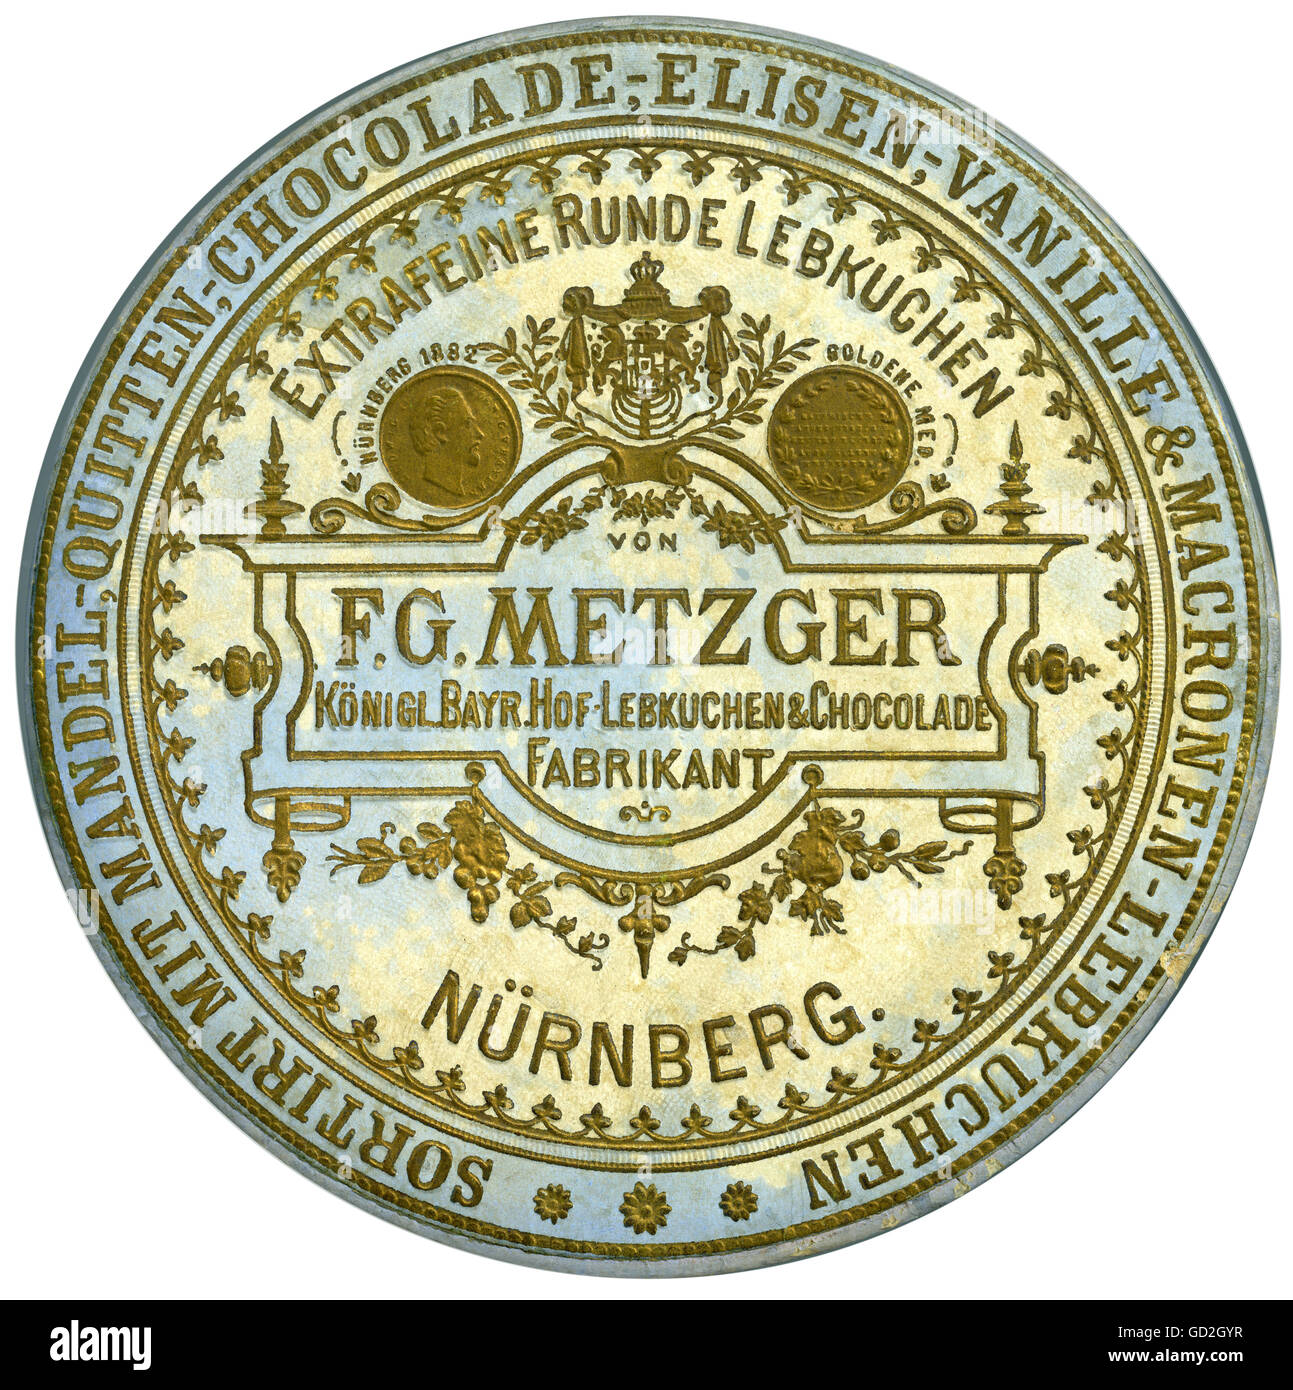 food, Nuremberg gingerbread, made by F. G. Metzger, Royal Bavarian Gingerbread & Chocolade Manufacturer, Nuremberg, traditional company, today Haeberlein butcher, decorative cover of a vintage gingerbread box, top side of the box, Germany, circa 1885, Additional-Rights-Clearences-Not Available Stock Photo